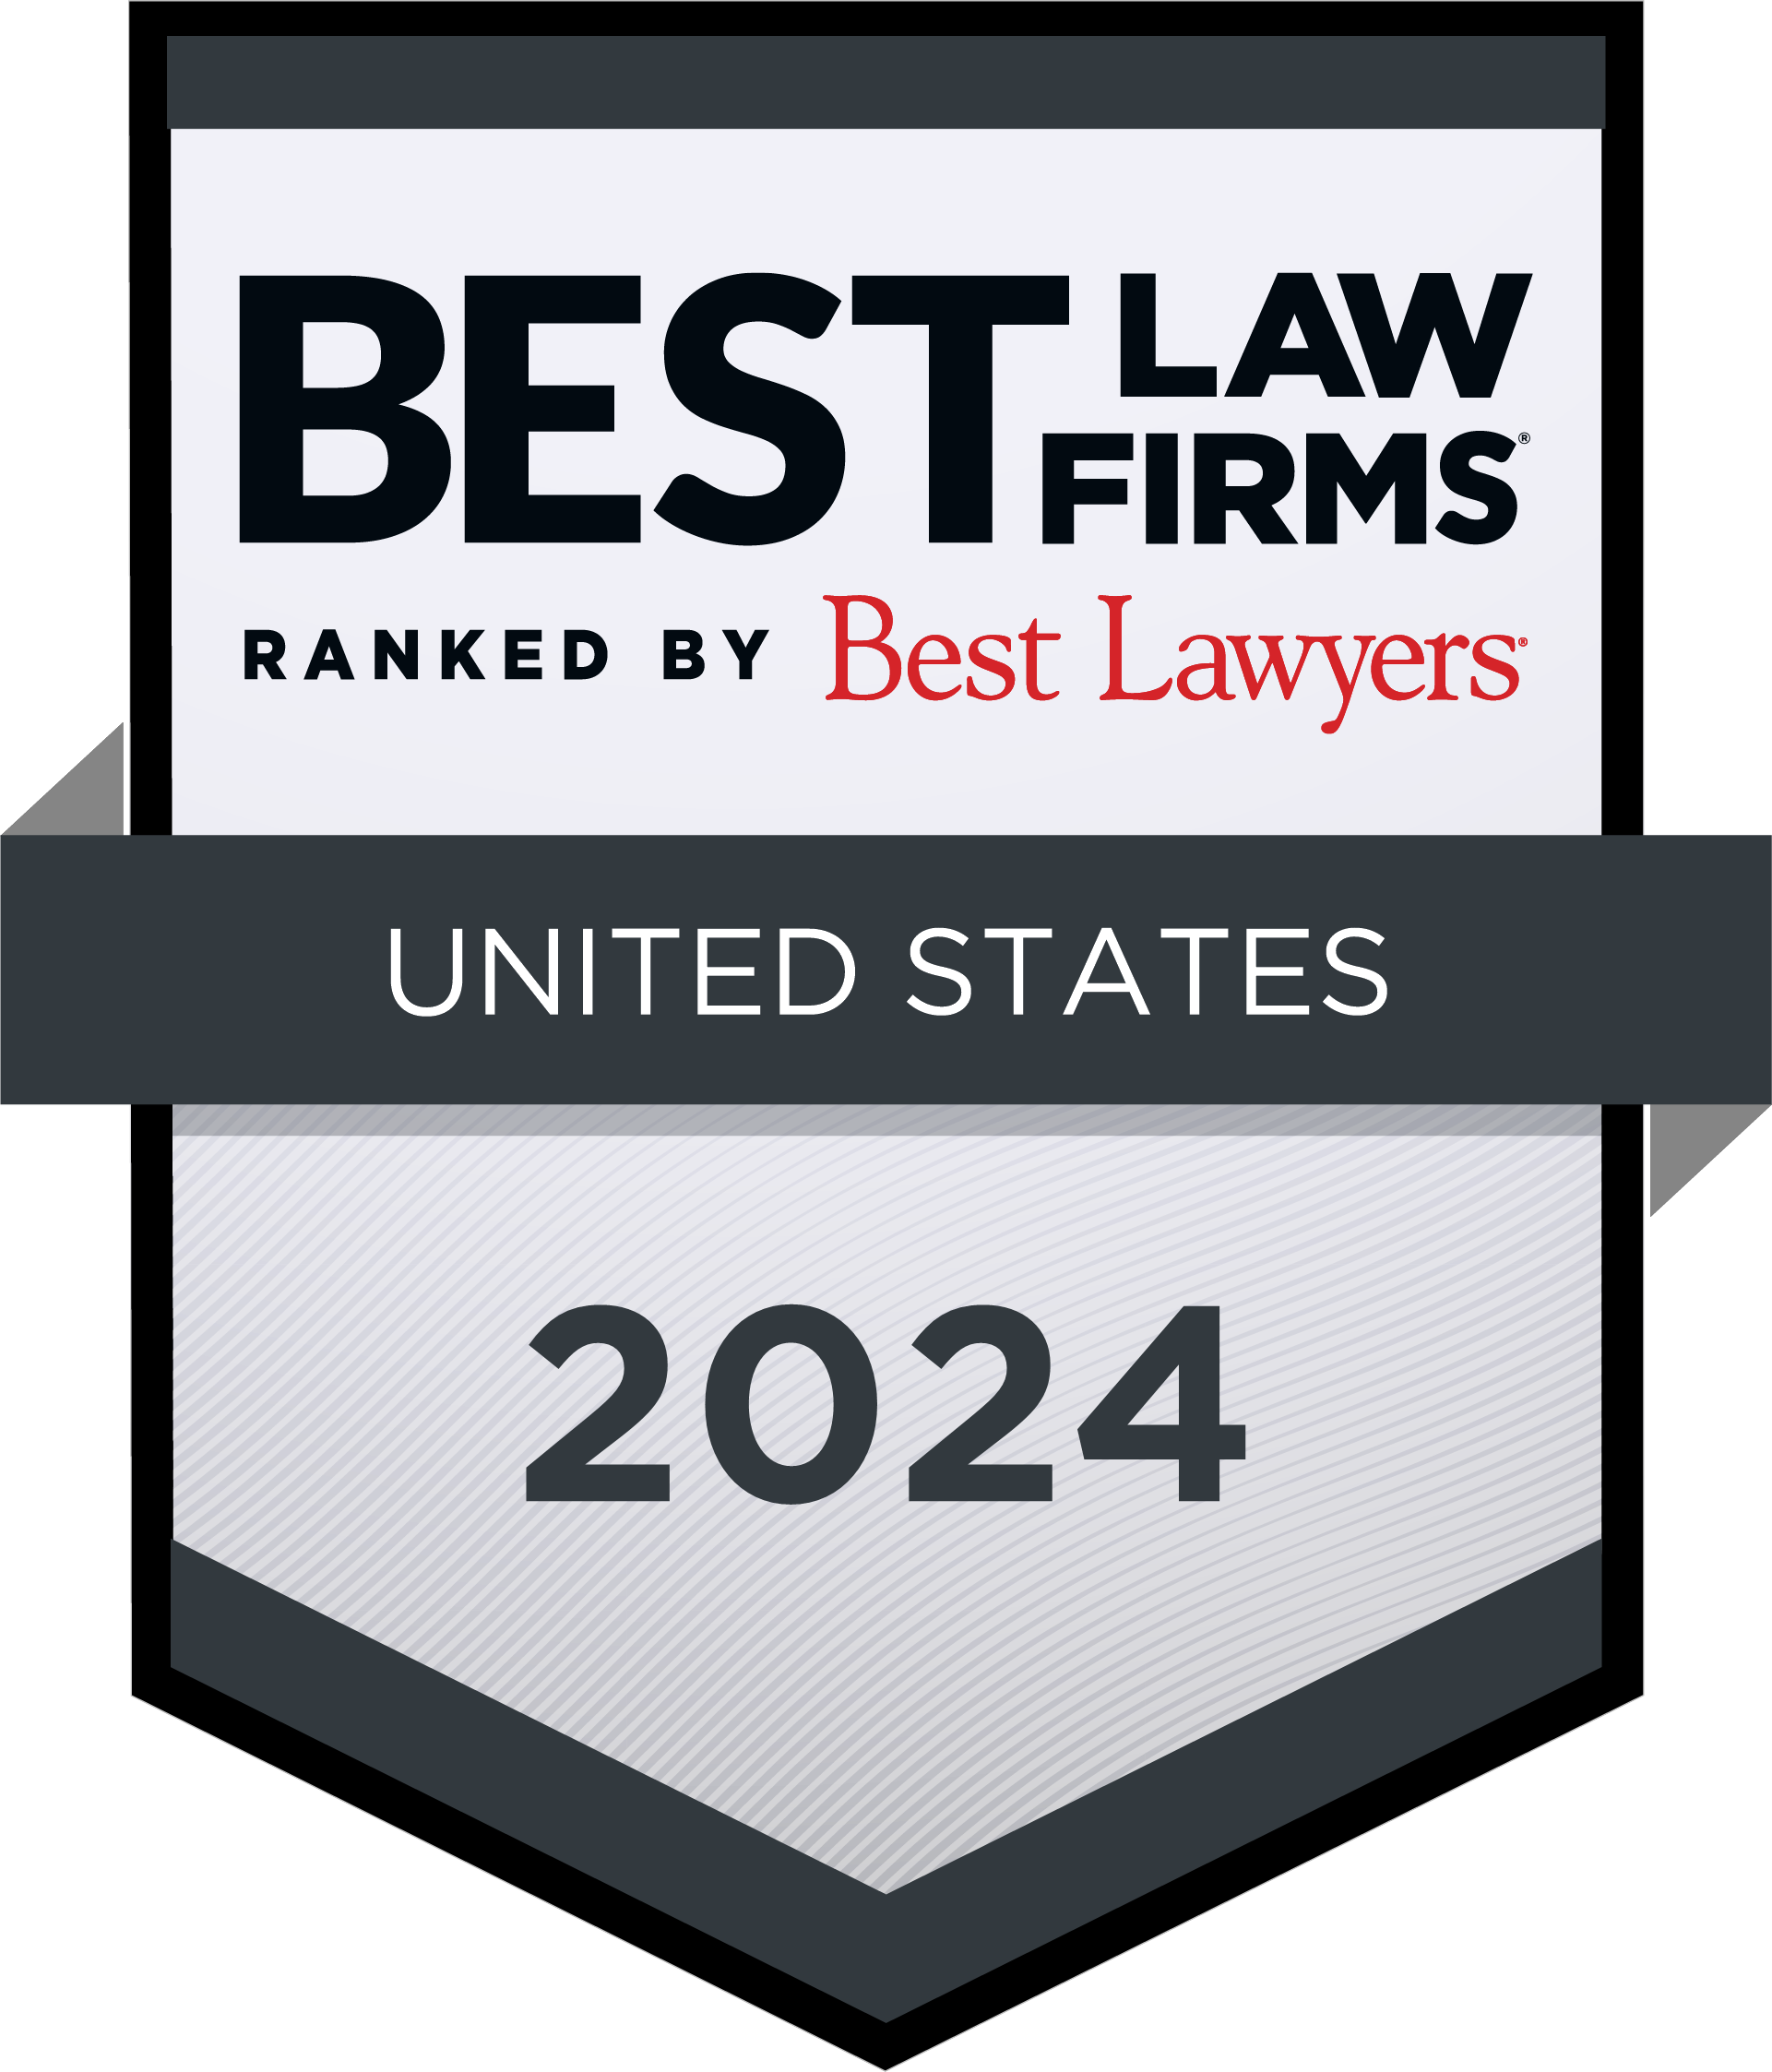 Best Law Firms 2024 - Ranked by Best Lawyers